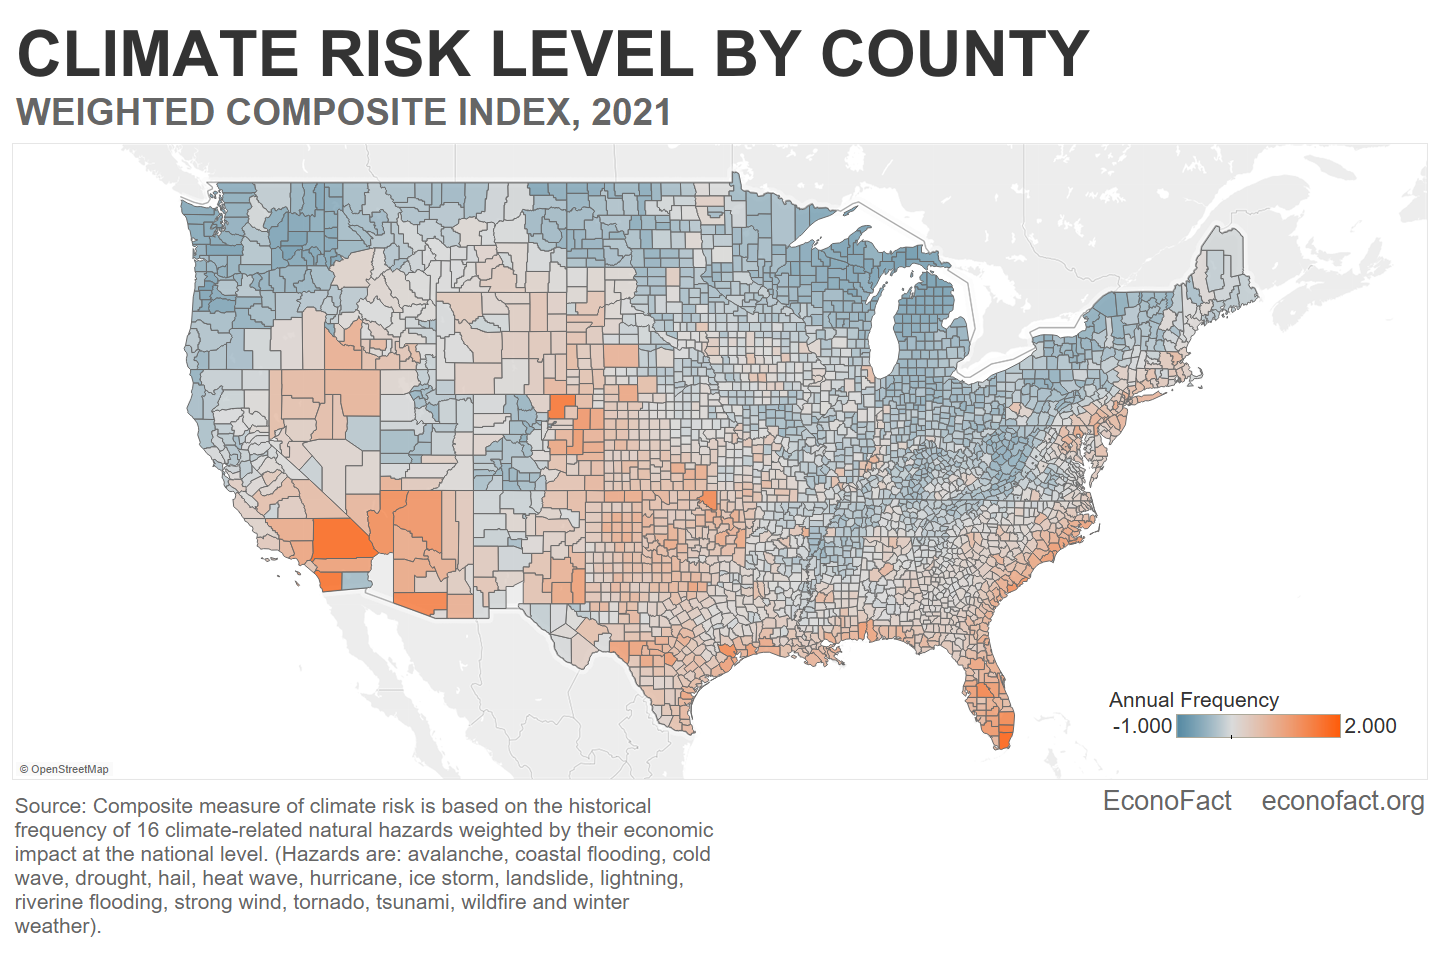 Are Americans Moving to Locations With Higher Climate Risk?